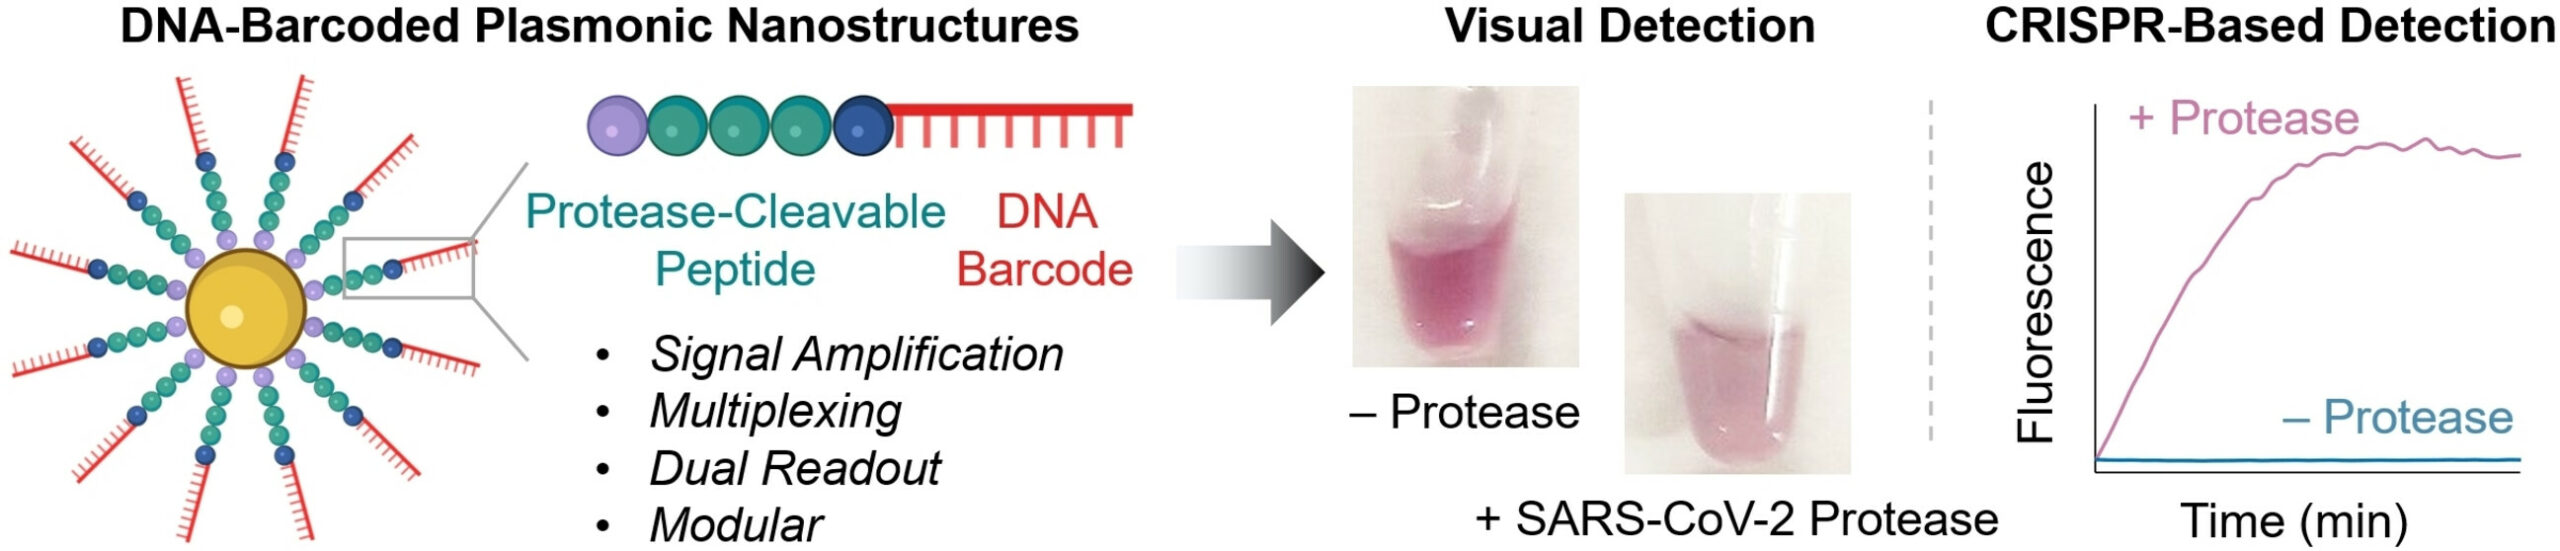 Nanoprobes with barcodes can sense multiple active proteases in parallel